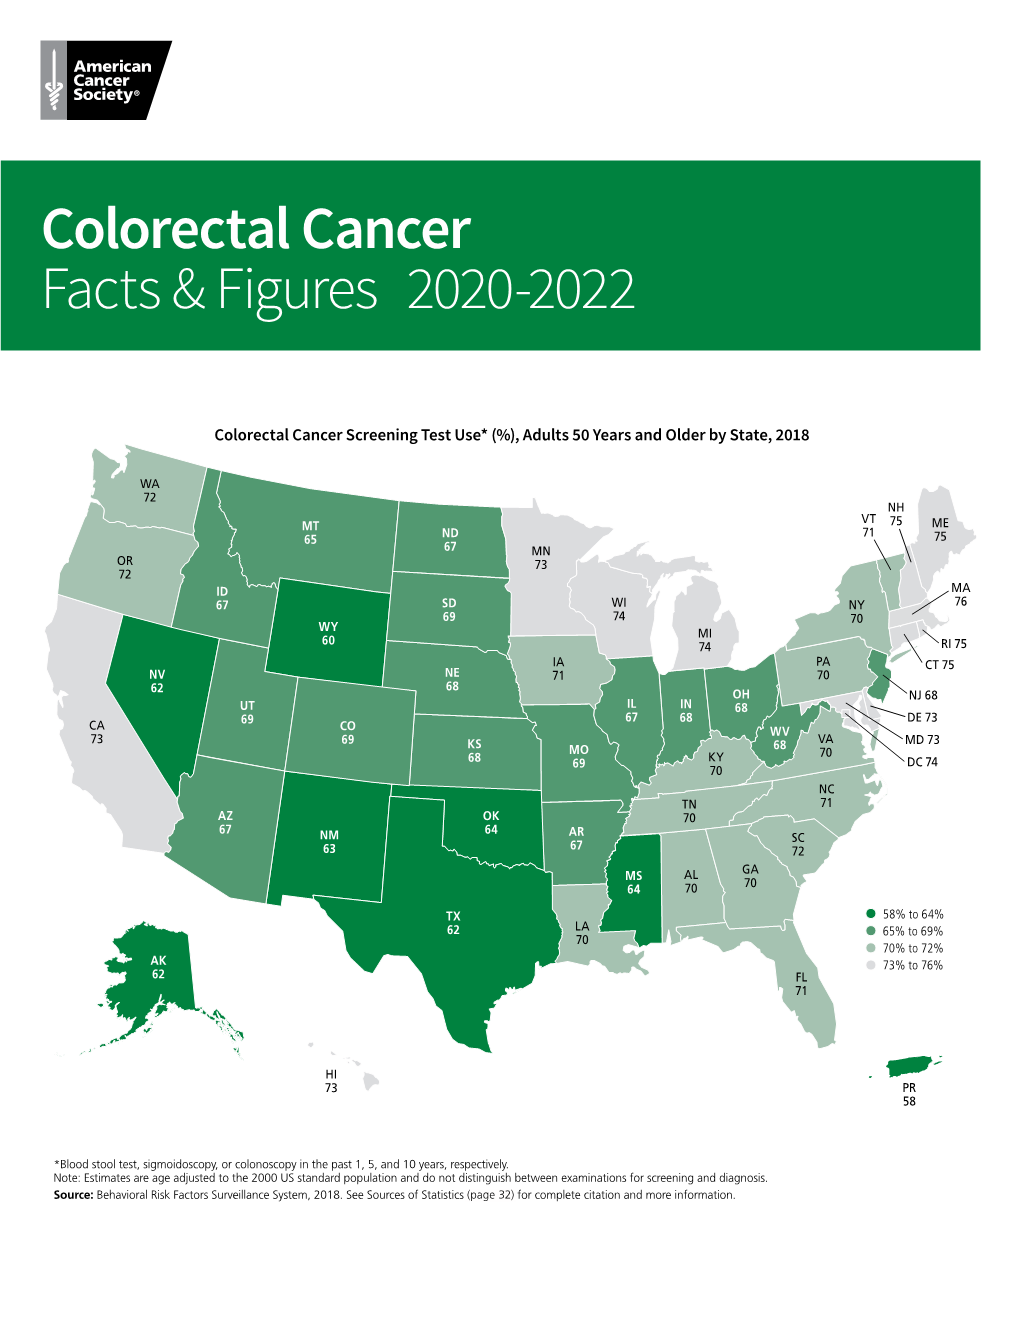 Colorectal Cancer Facts & Figures 2020-2022